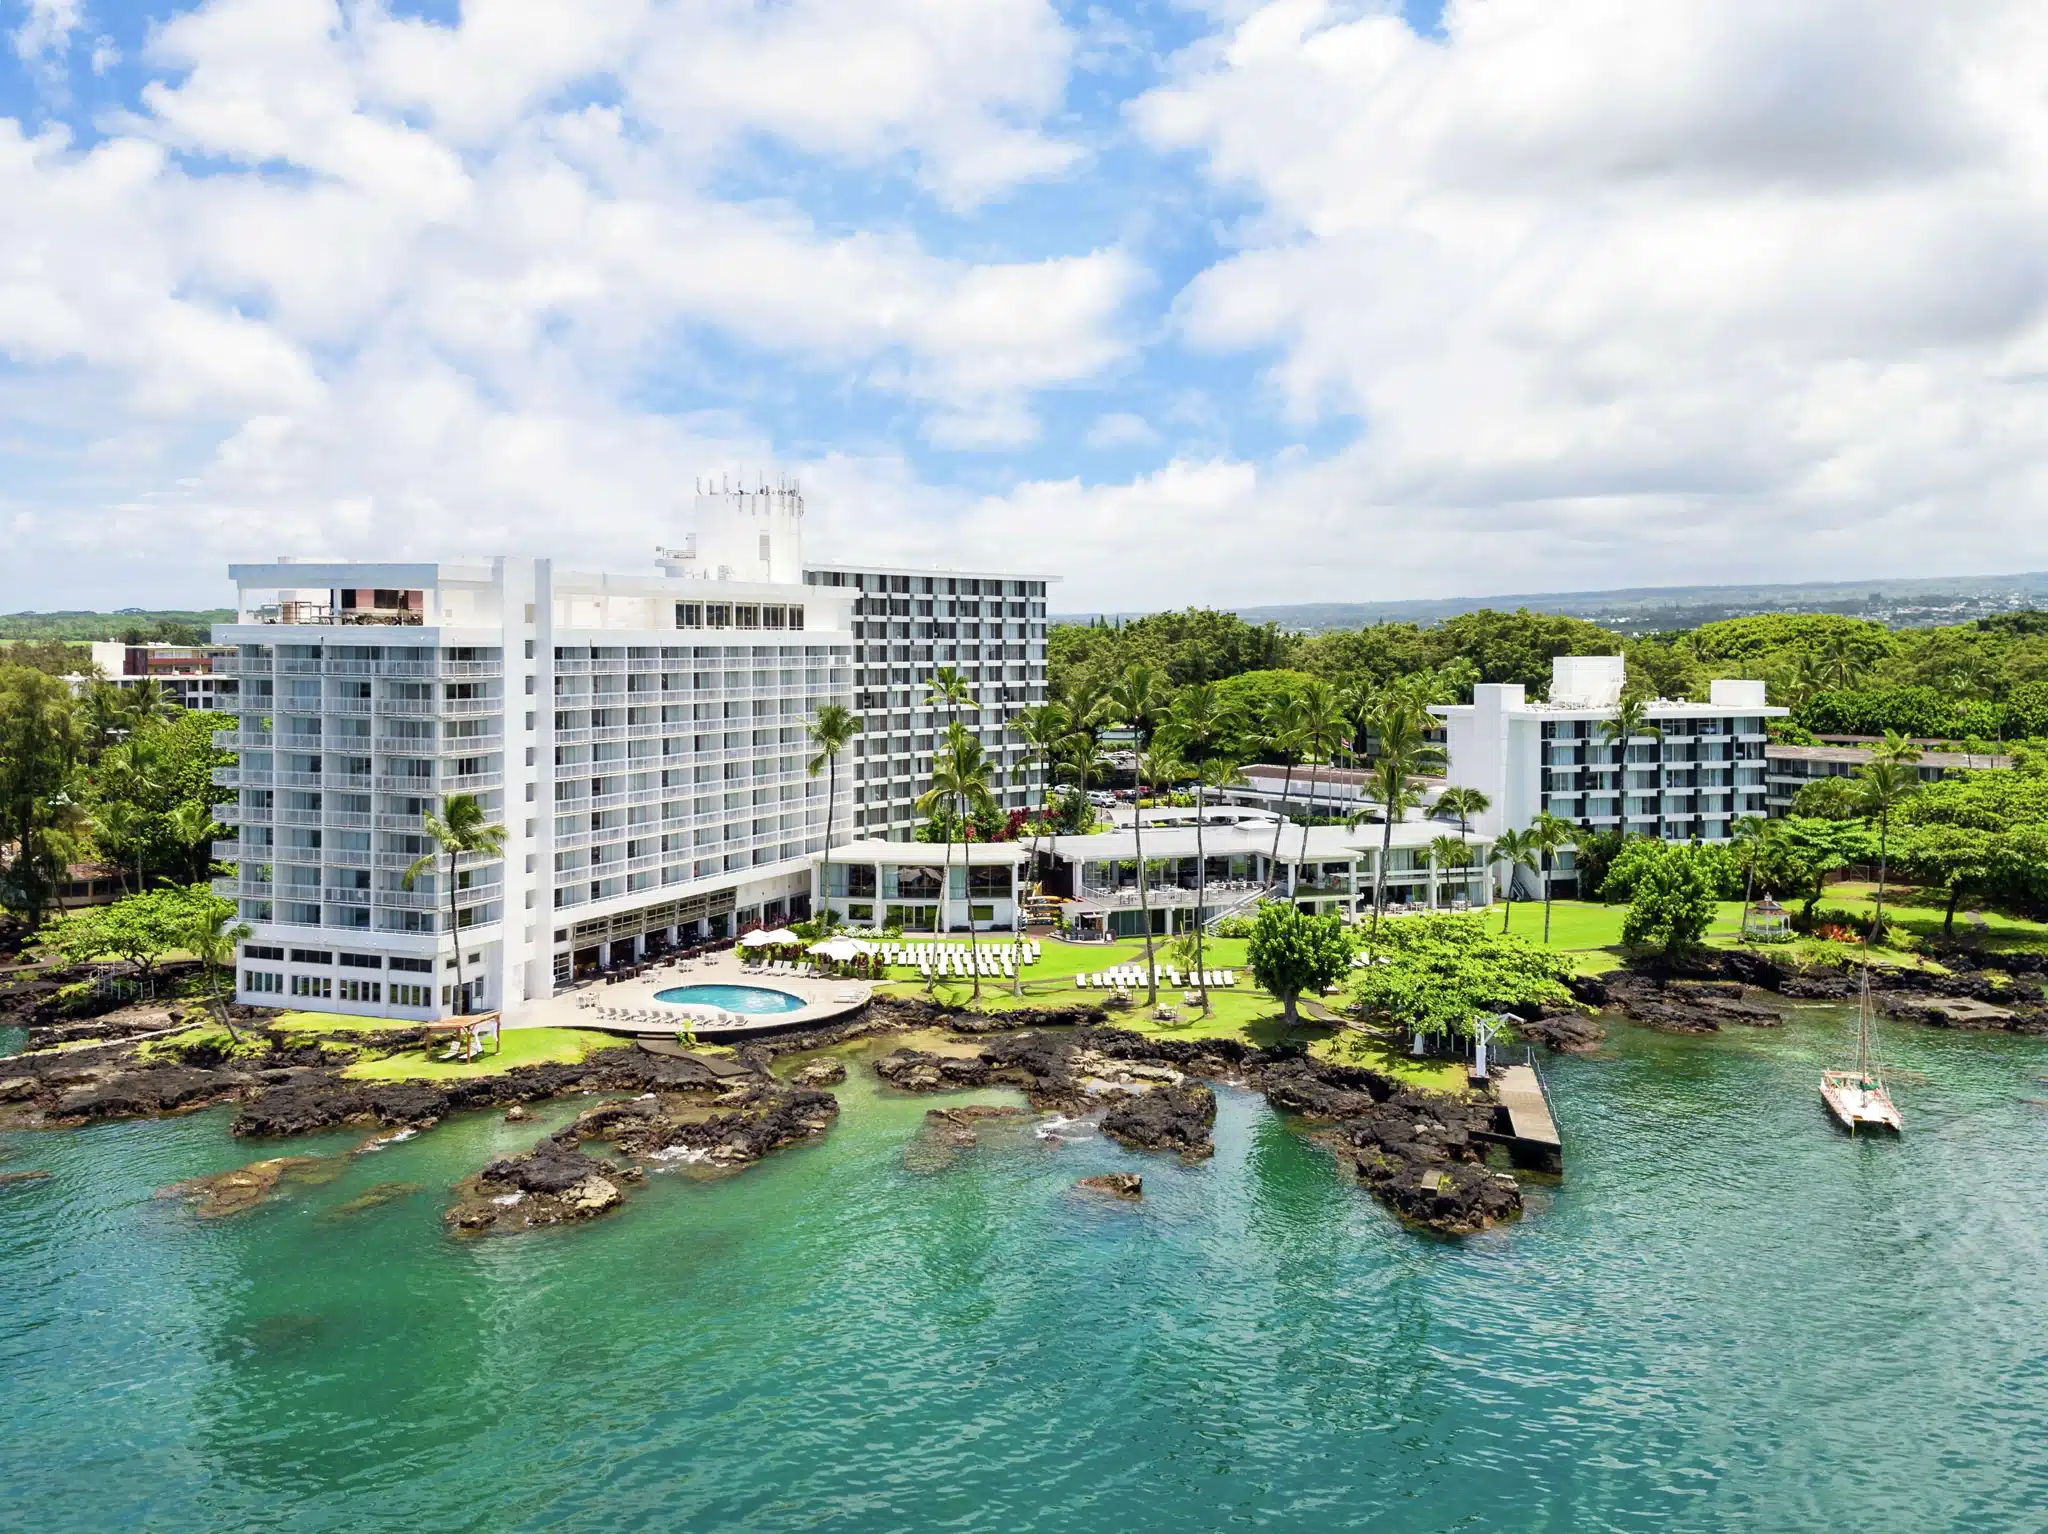 Grand Naniloa Hotel by Hilton is a Hotel located in the city of Hilo on Big Island, Hawaii